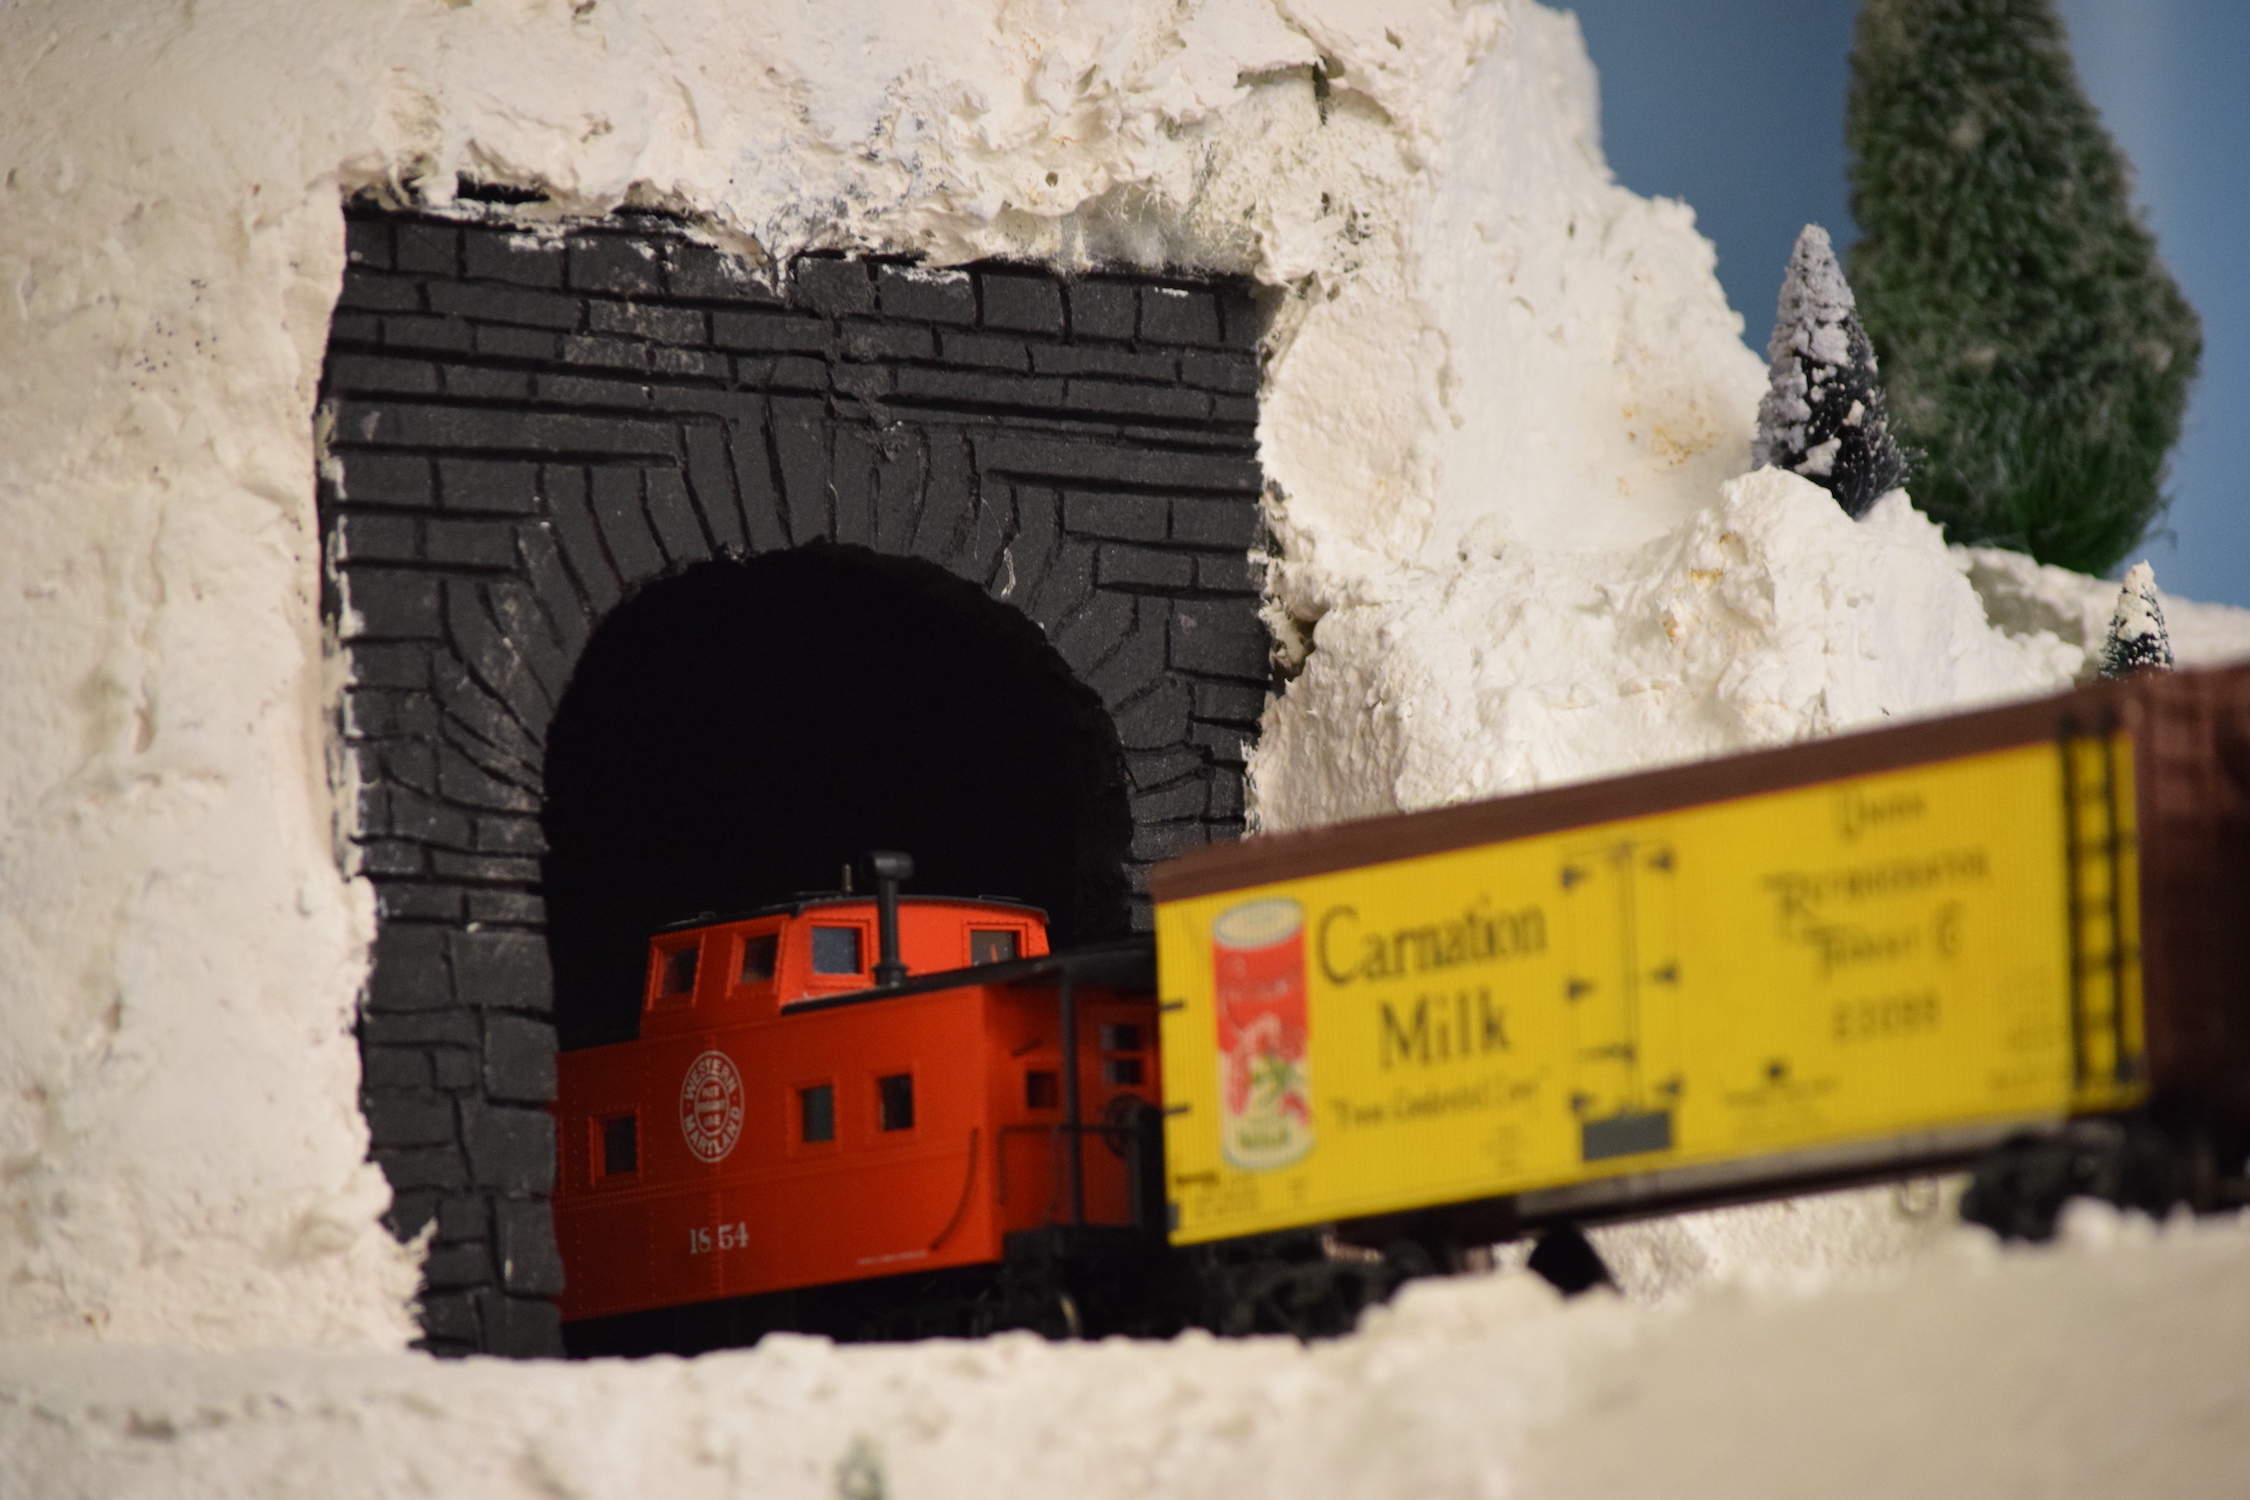 A snowy mountain scene with a freight train exiting a tunnel - "Christmas at the Roundhouse" model train display.